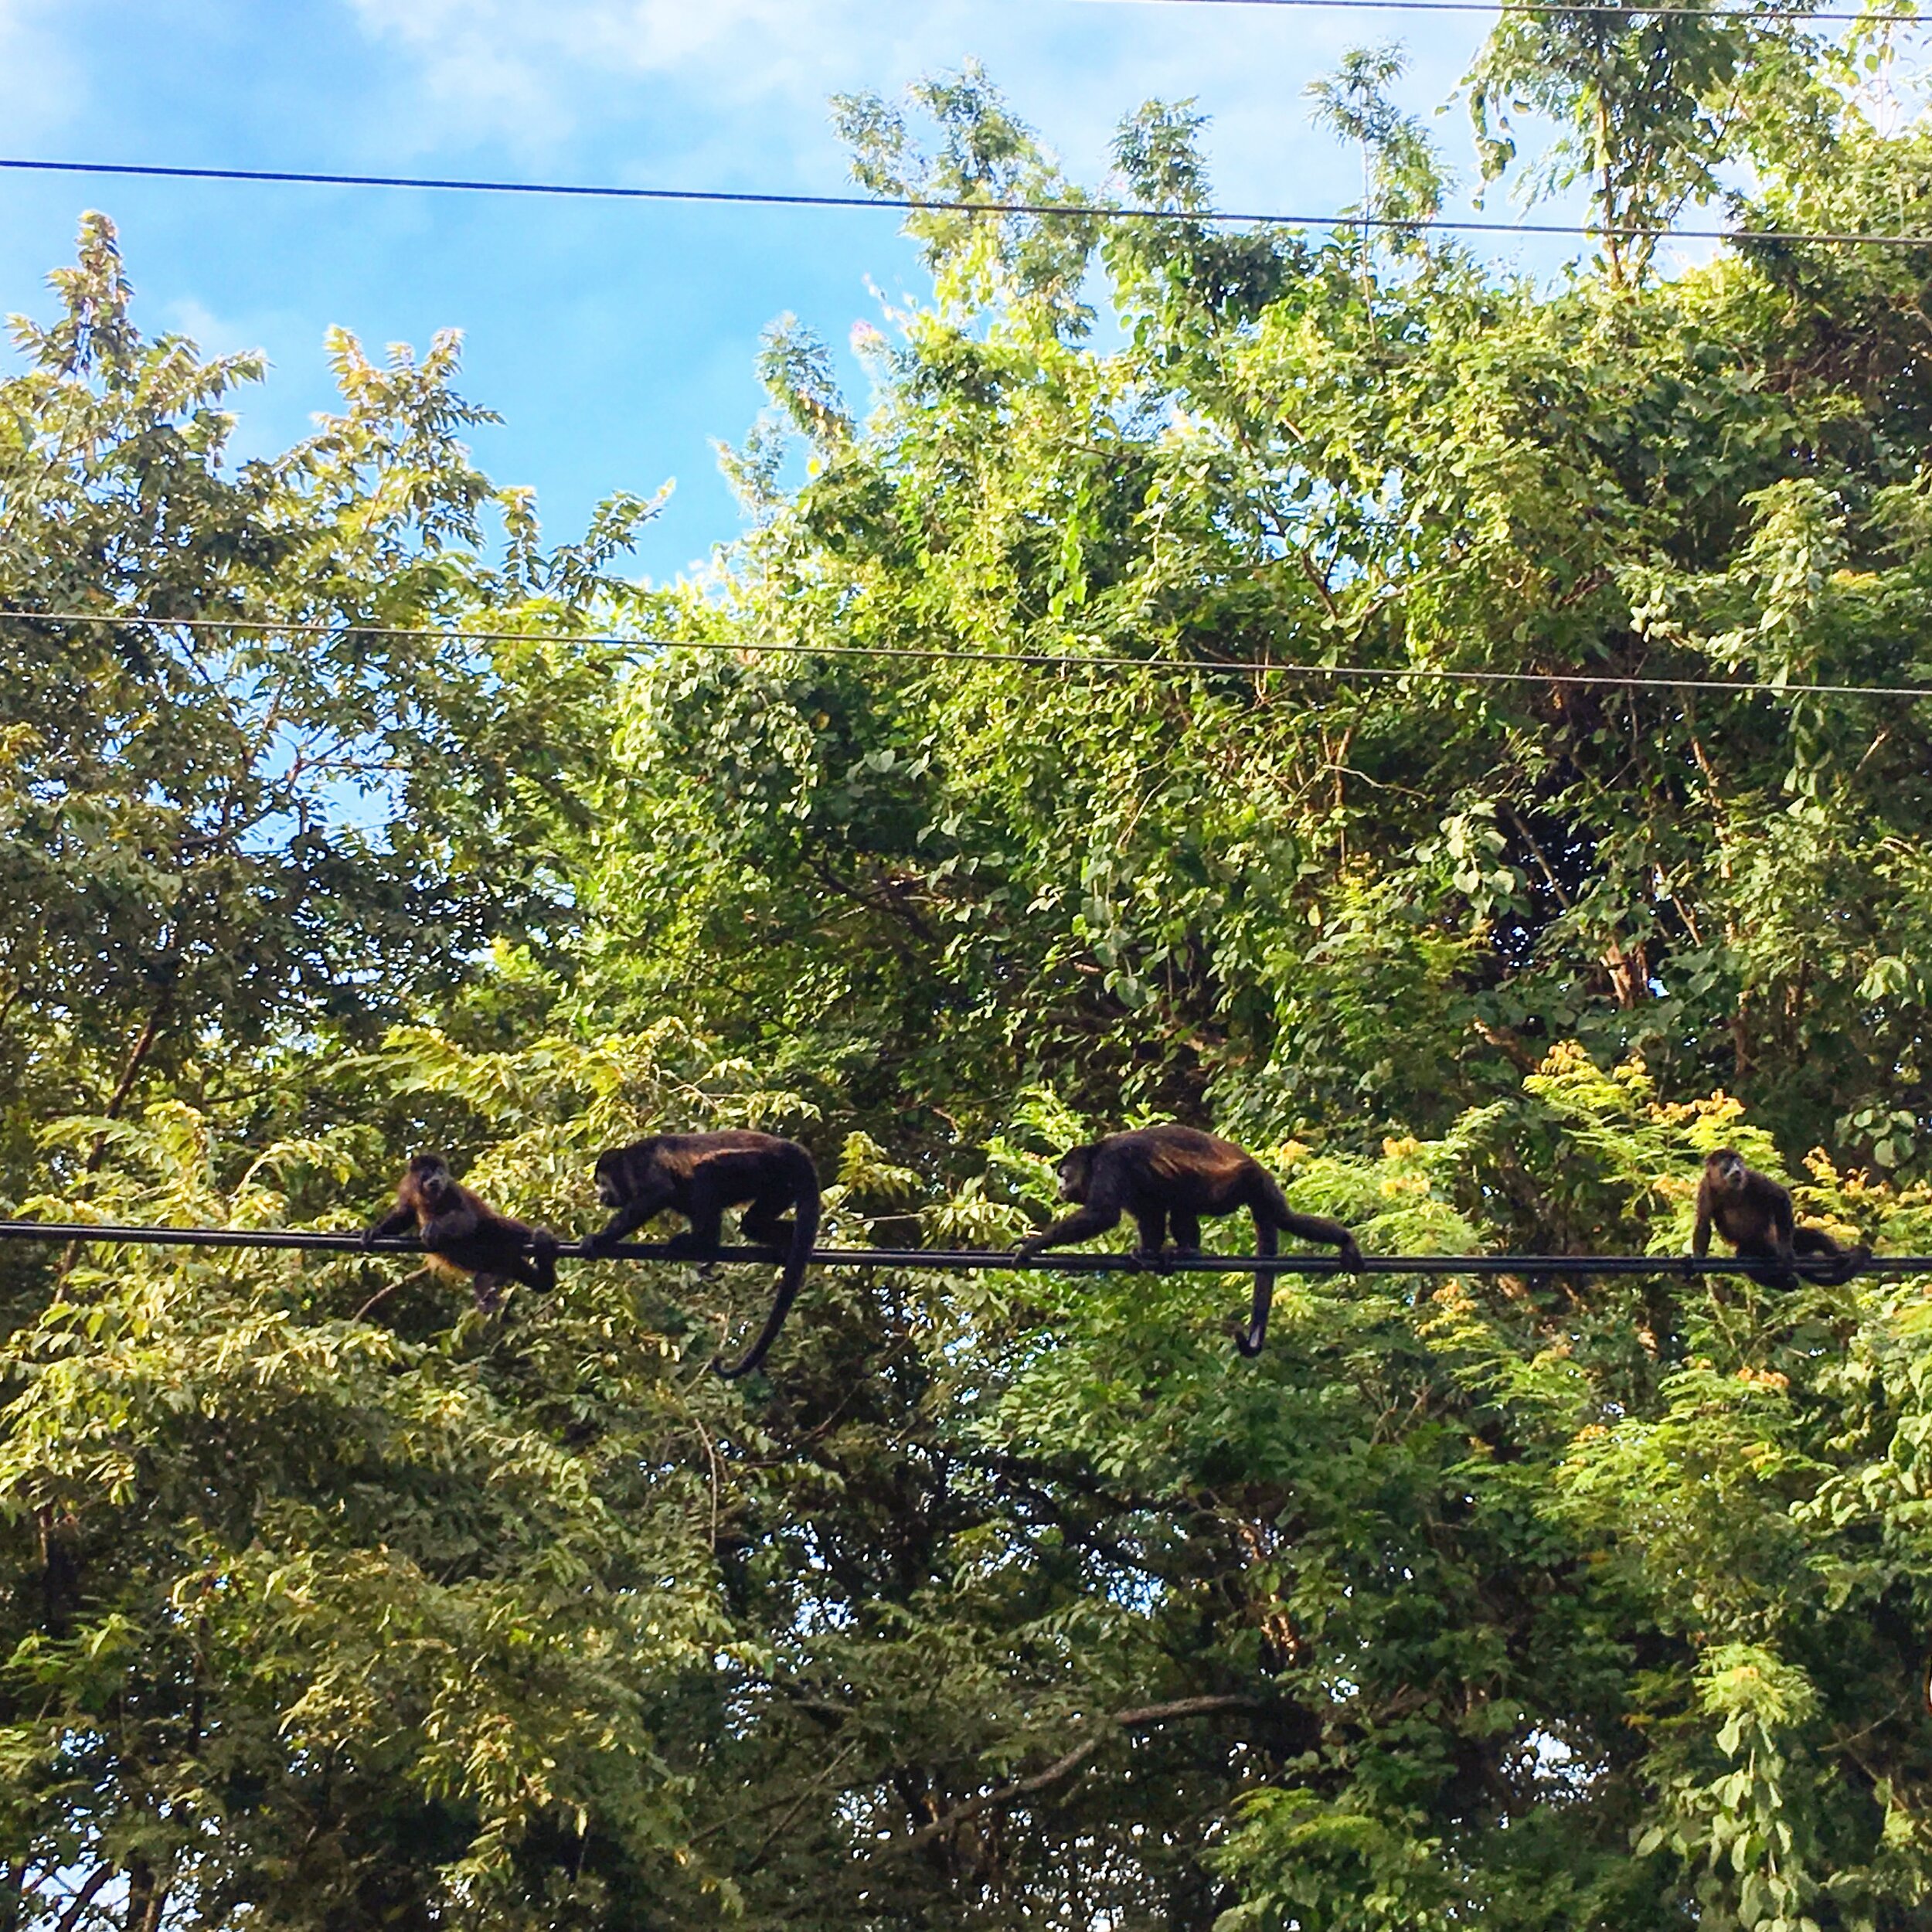 become a school counselor in Costa Rica and see monkeys